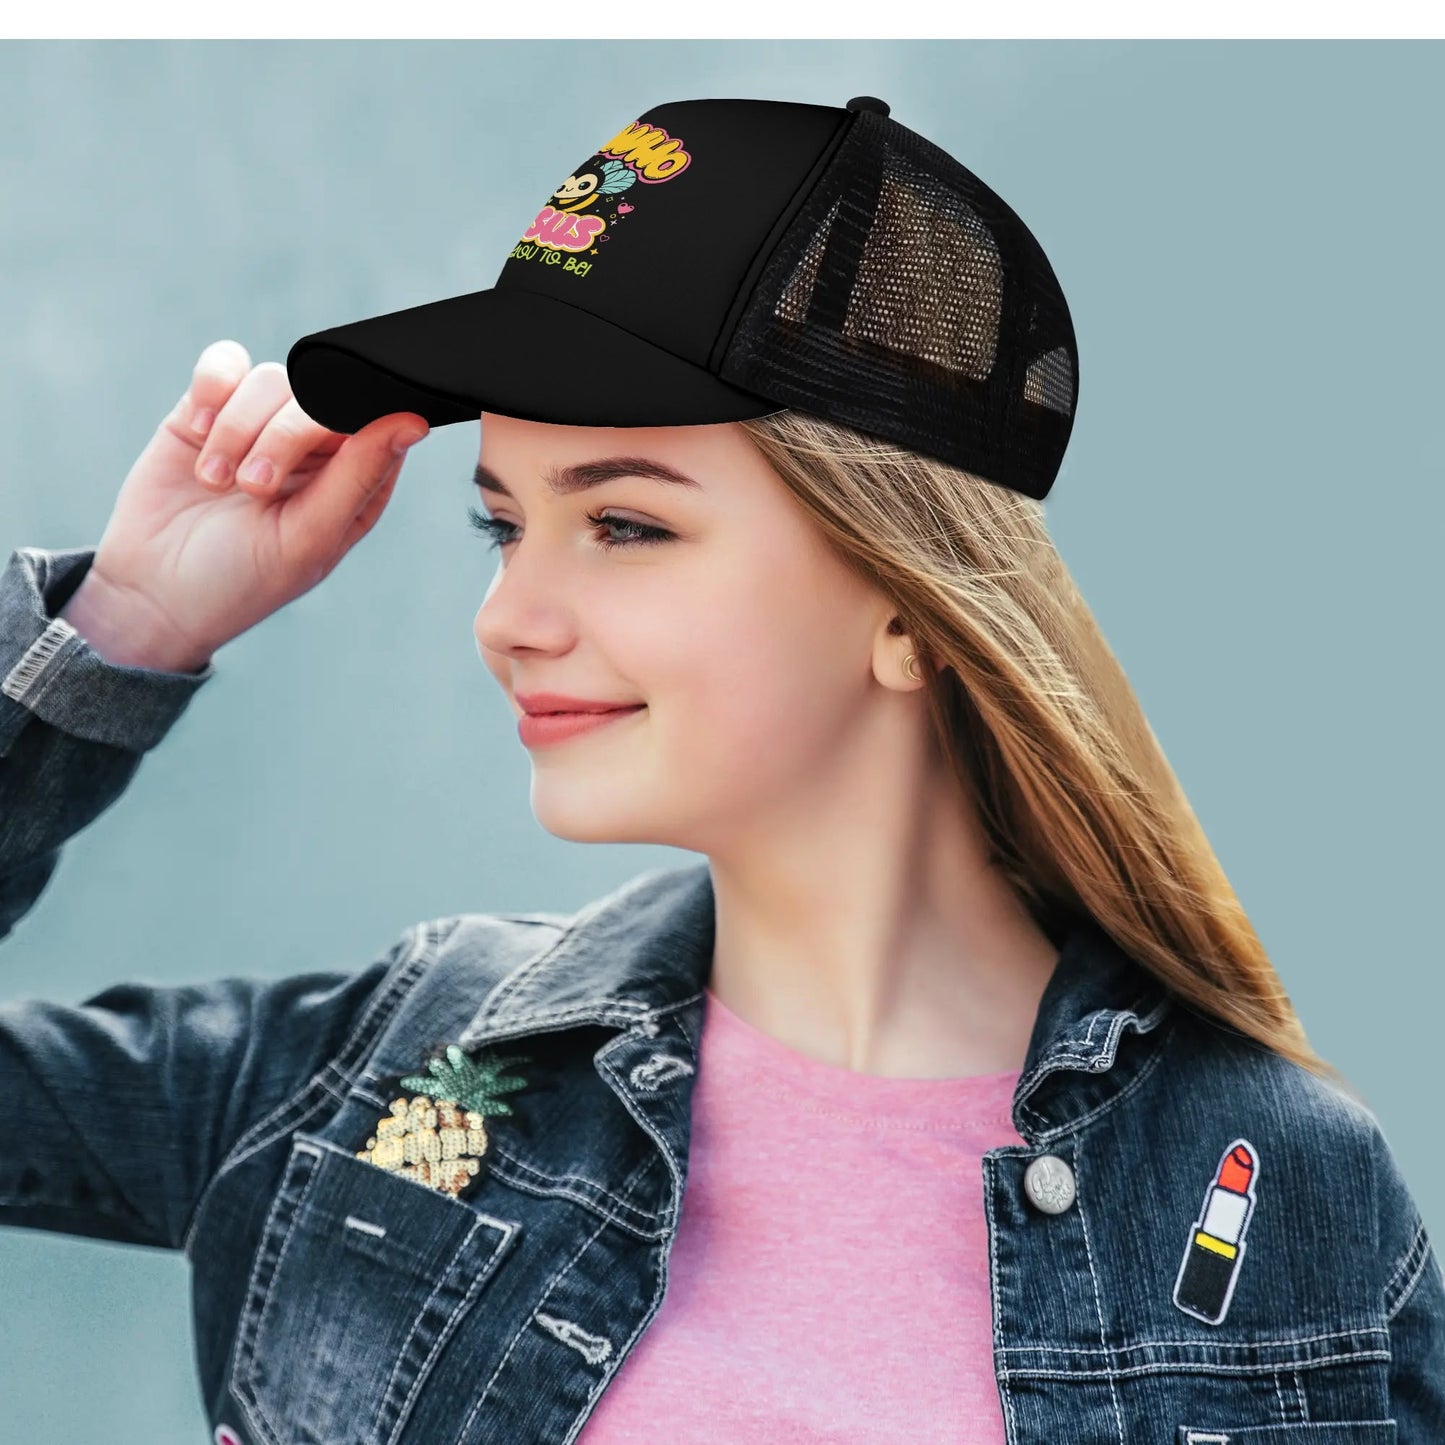 Bee Who Jesus Wants You To Be  Christian Kids Hat